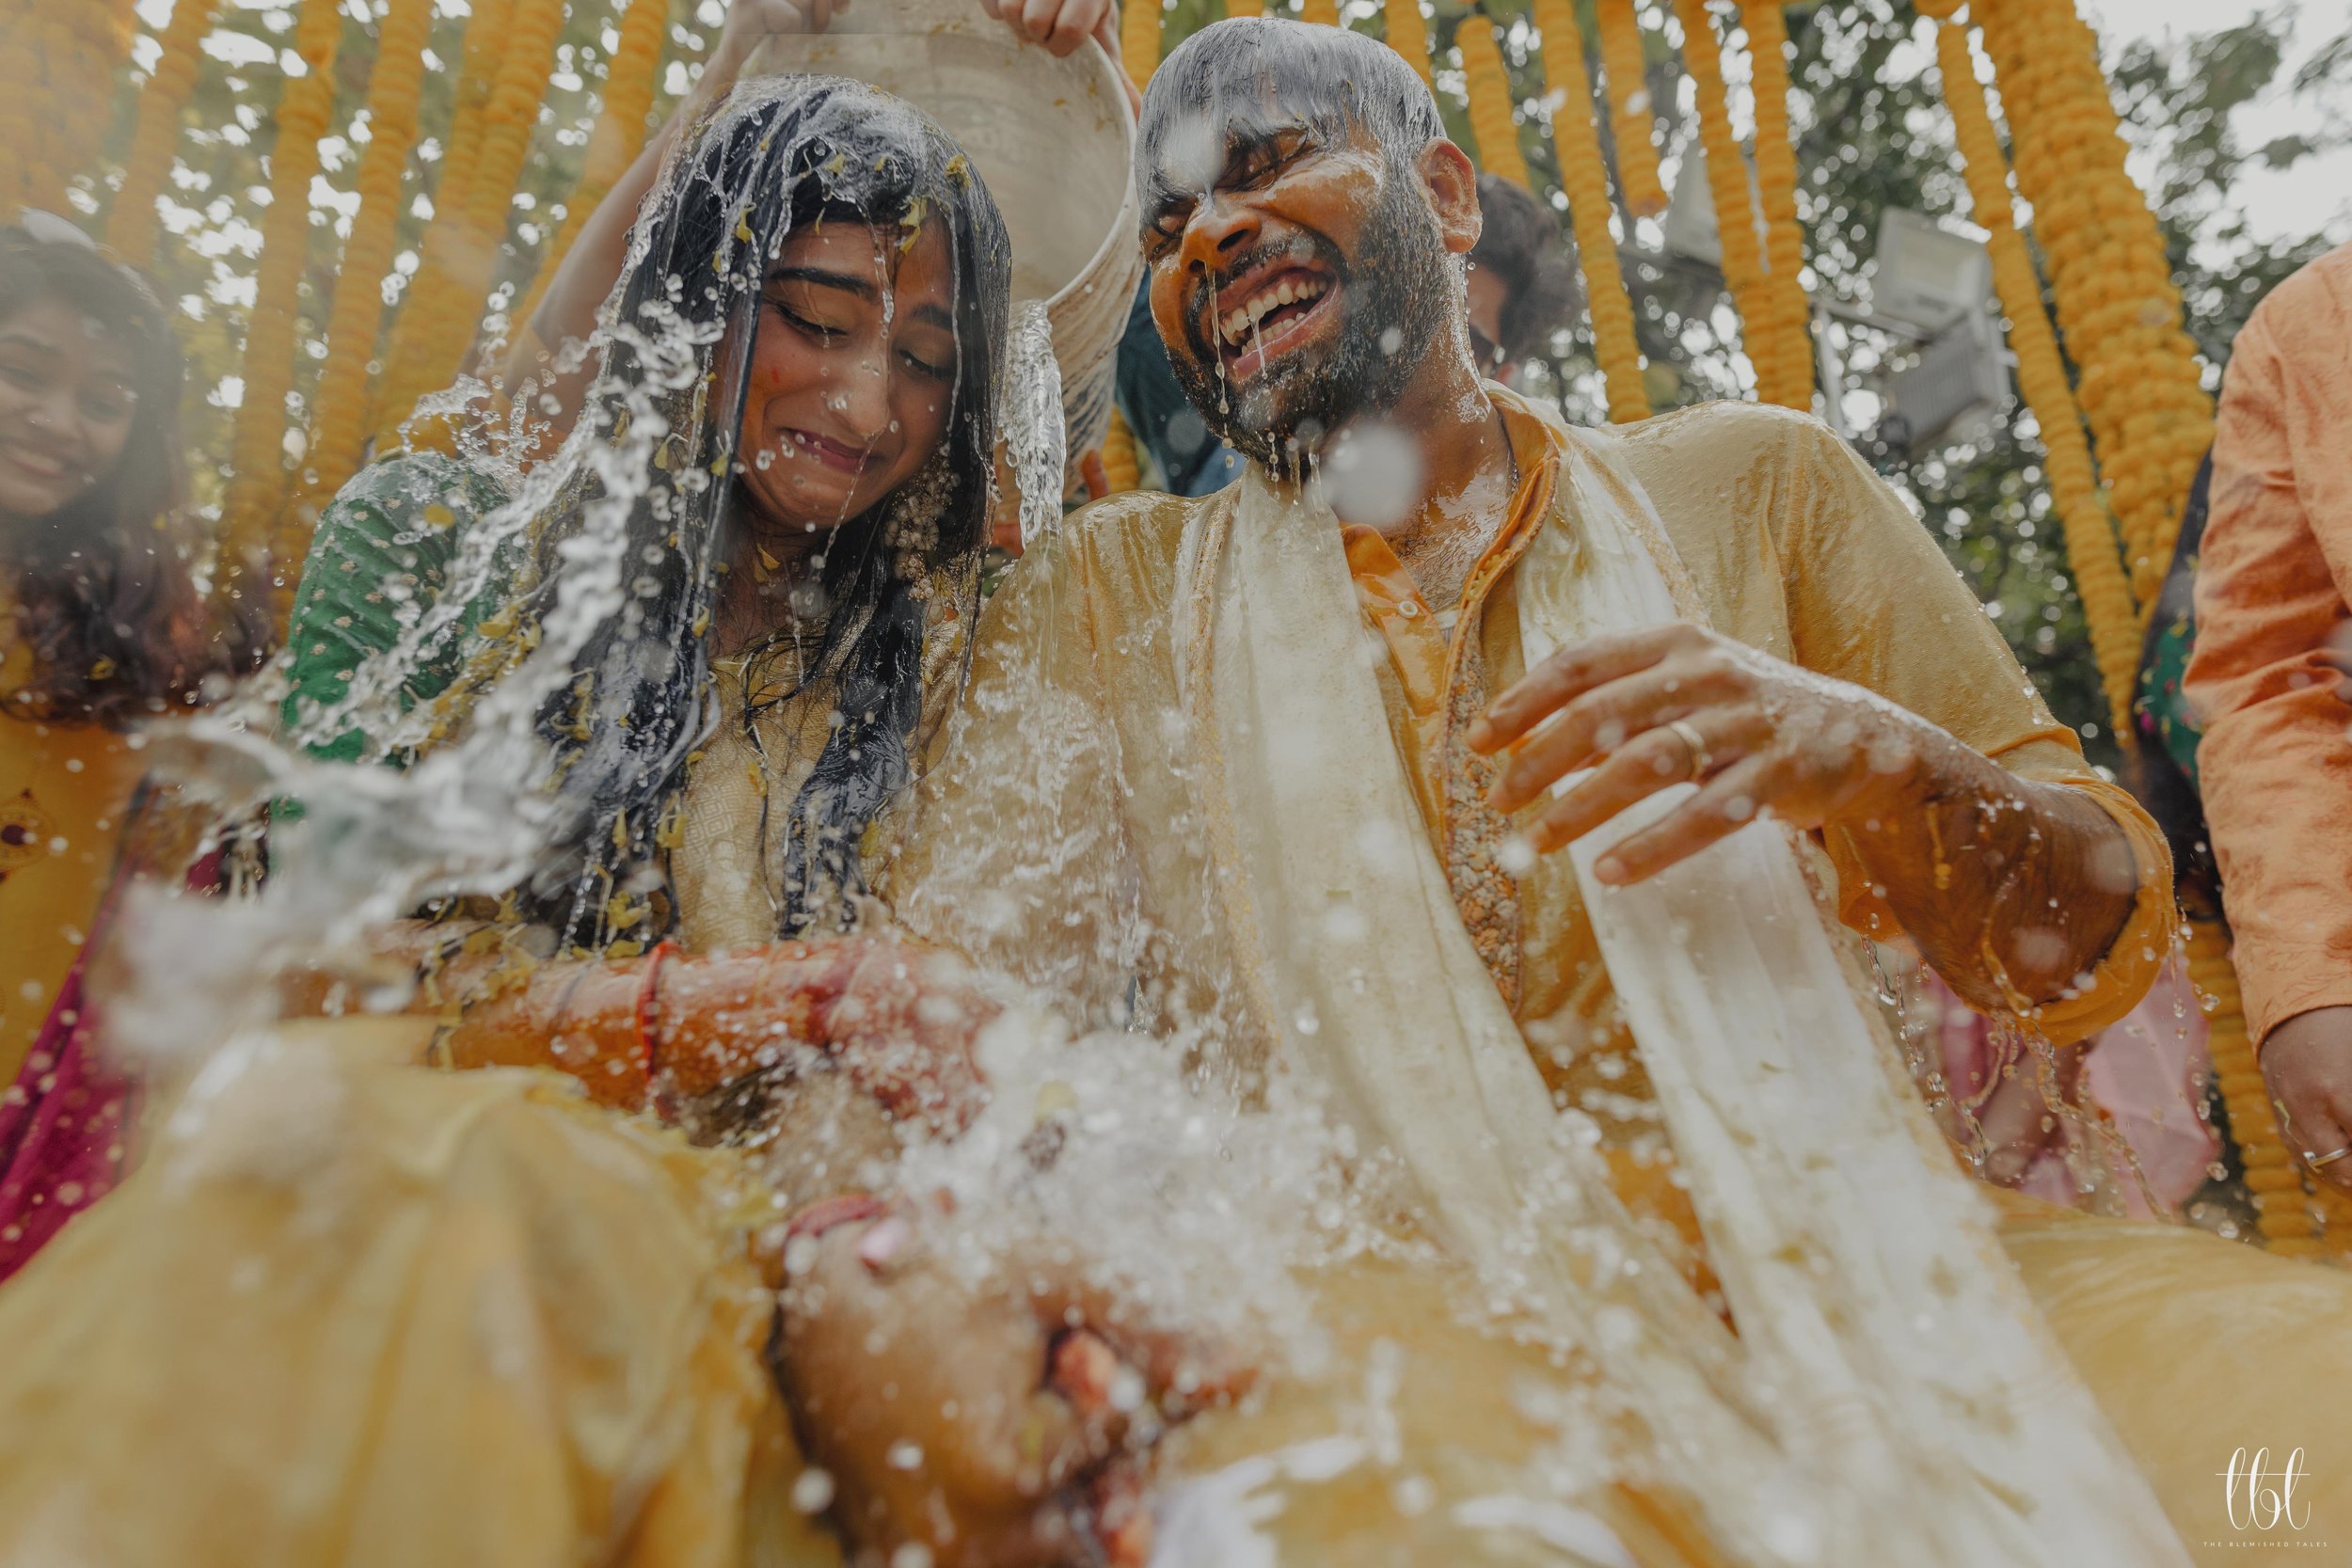 Just after their Haldi, Pooja &amp; Ishan's friends decided to give them a bucket bath.